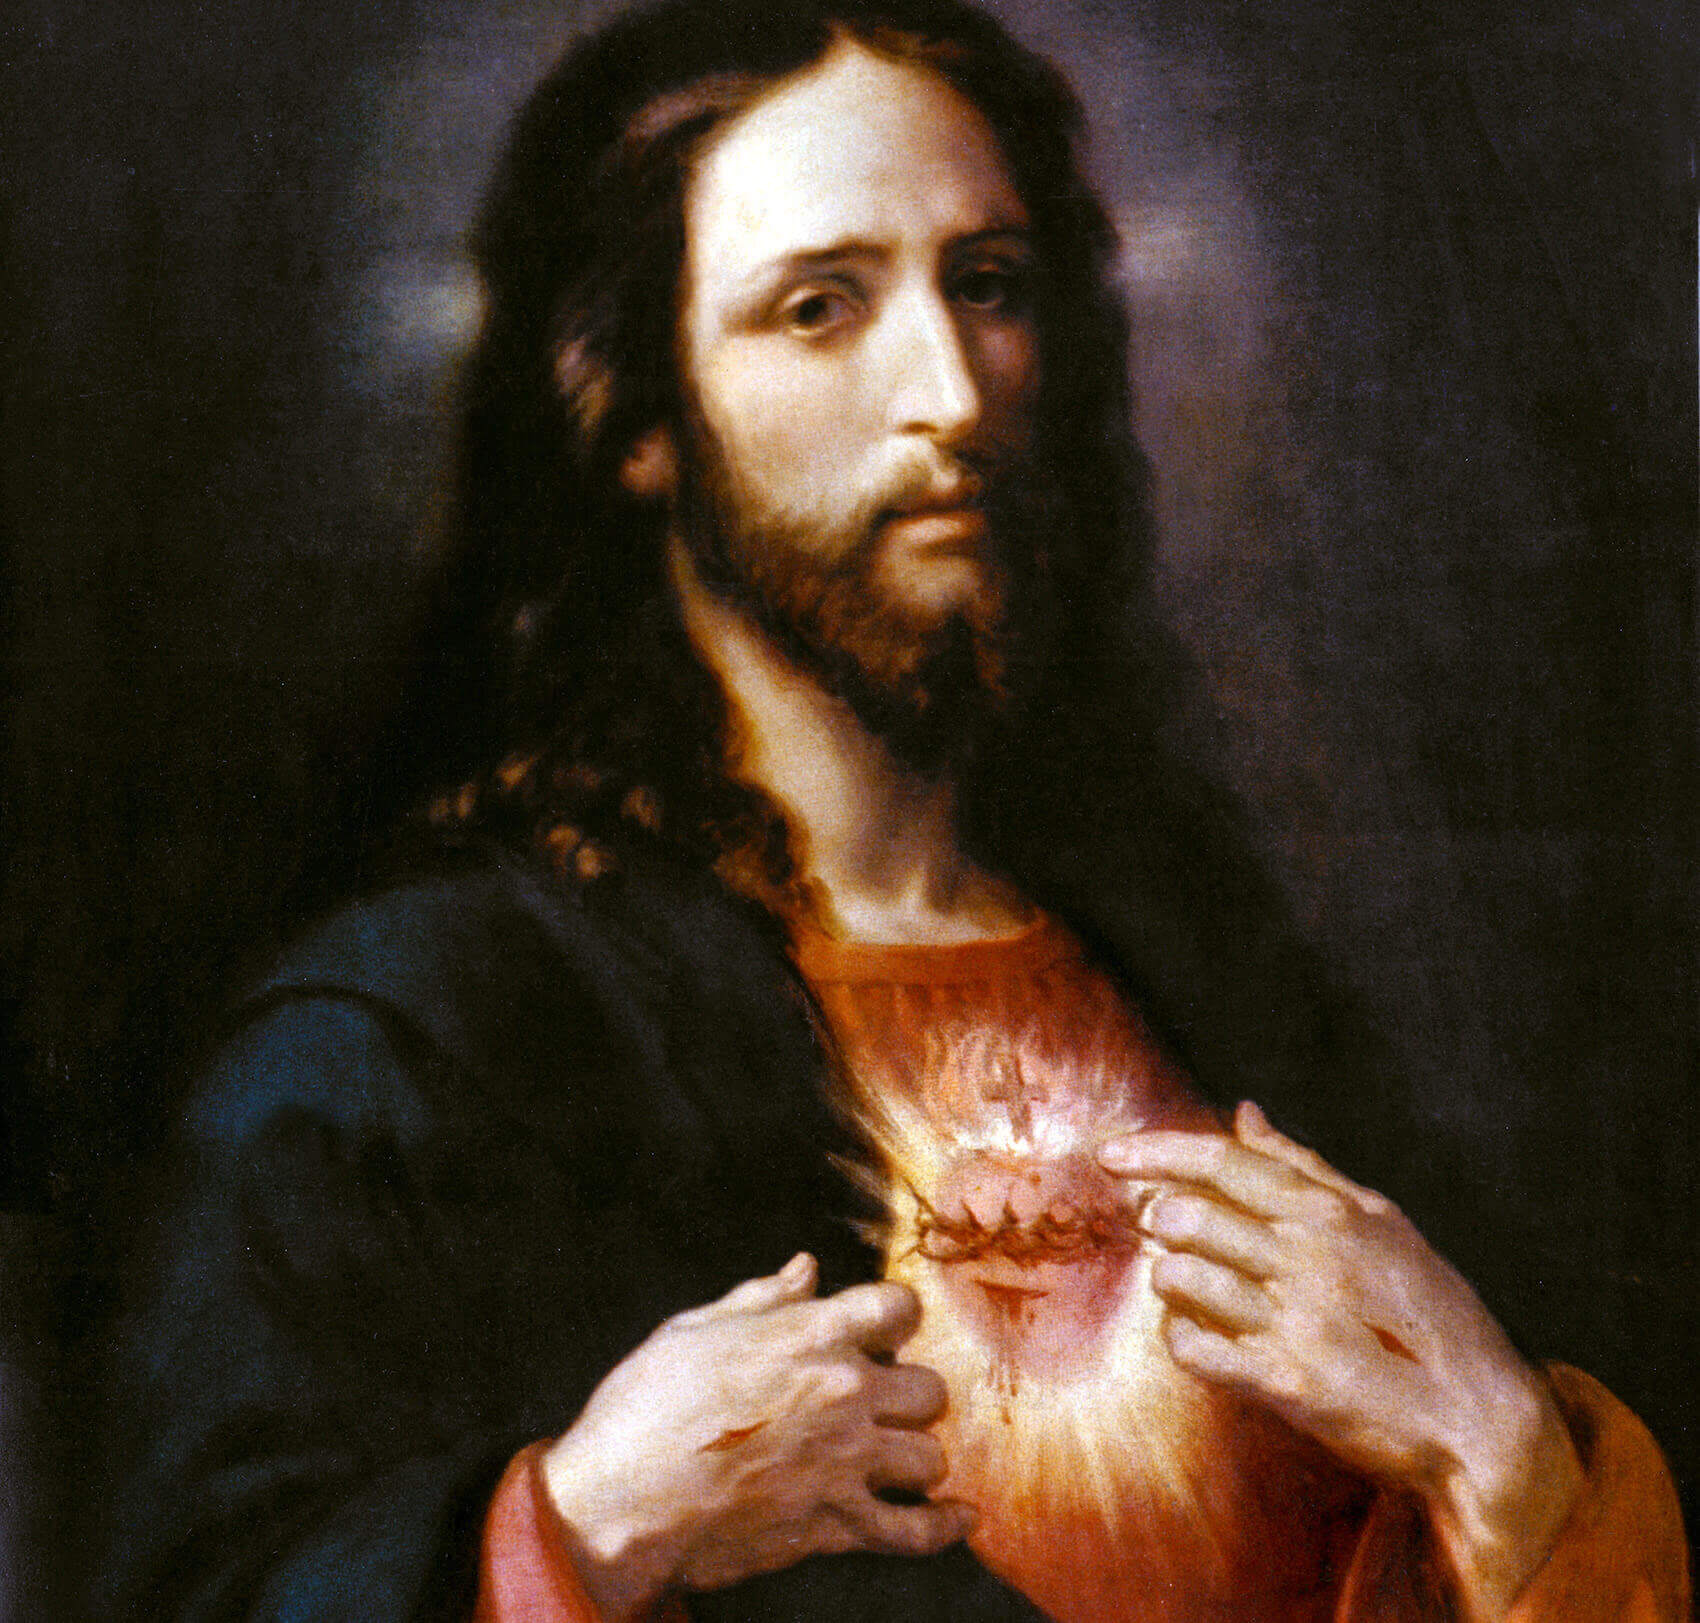 The Sacred Heart by Ponce